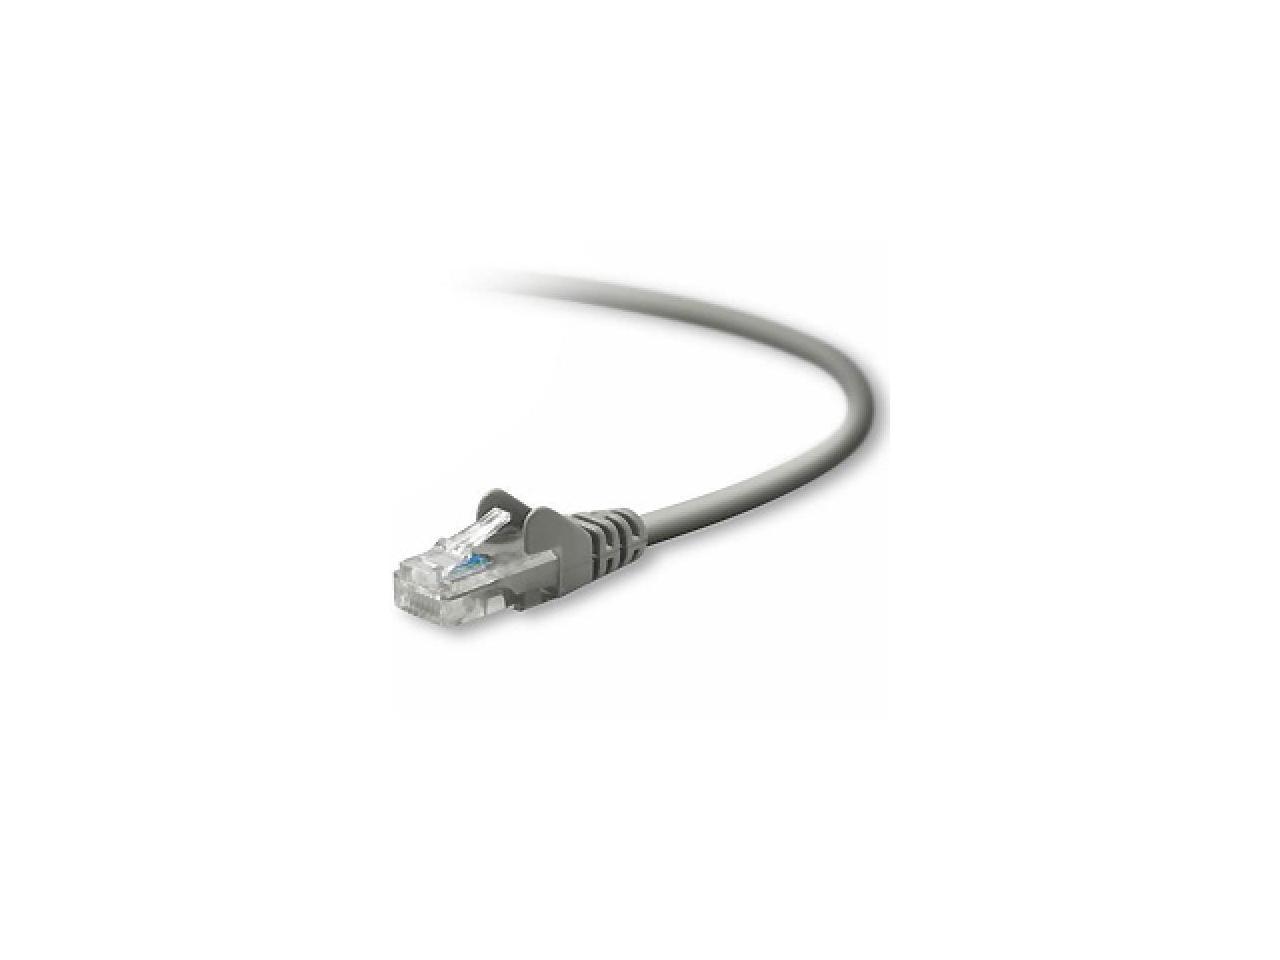 INTELLINET 319812 CAT-5E UTP Patch Cable 14ft Gray 